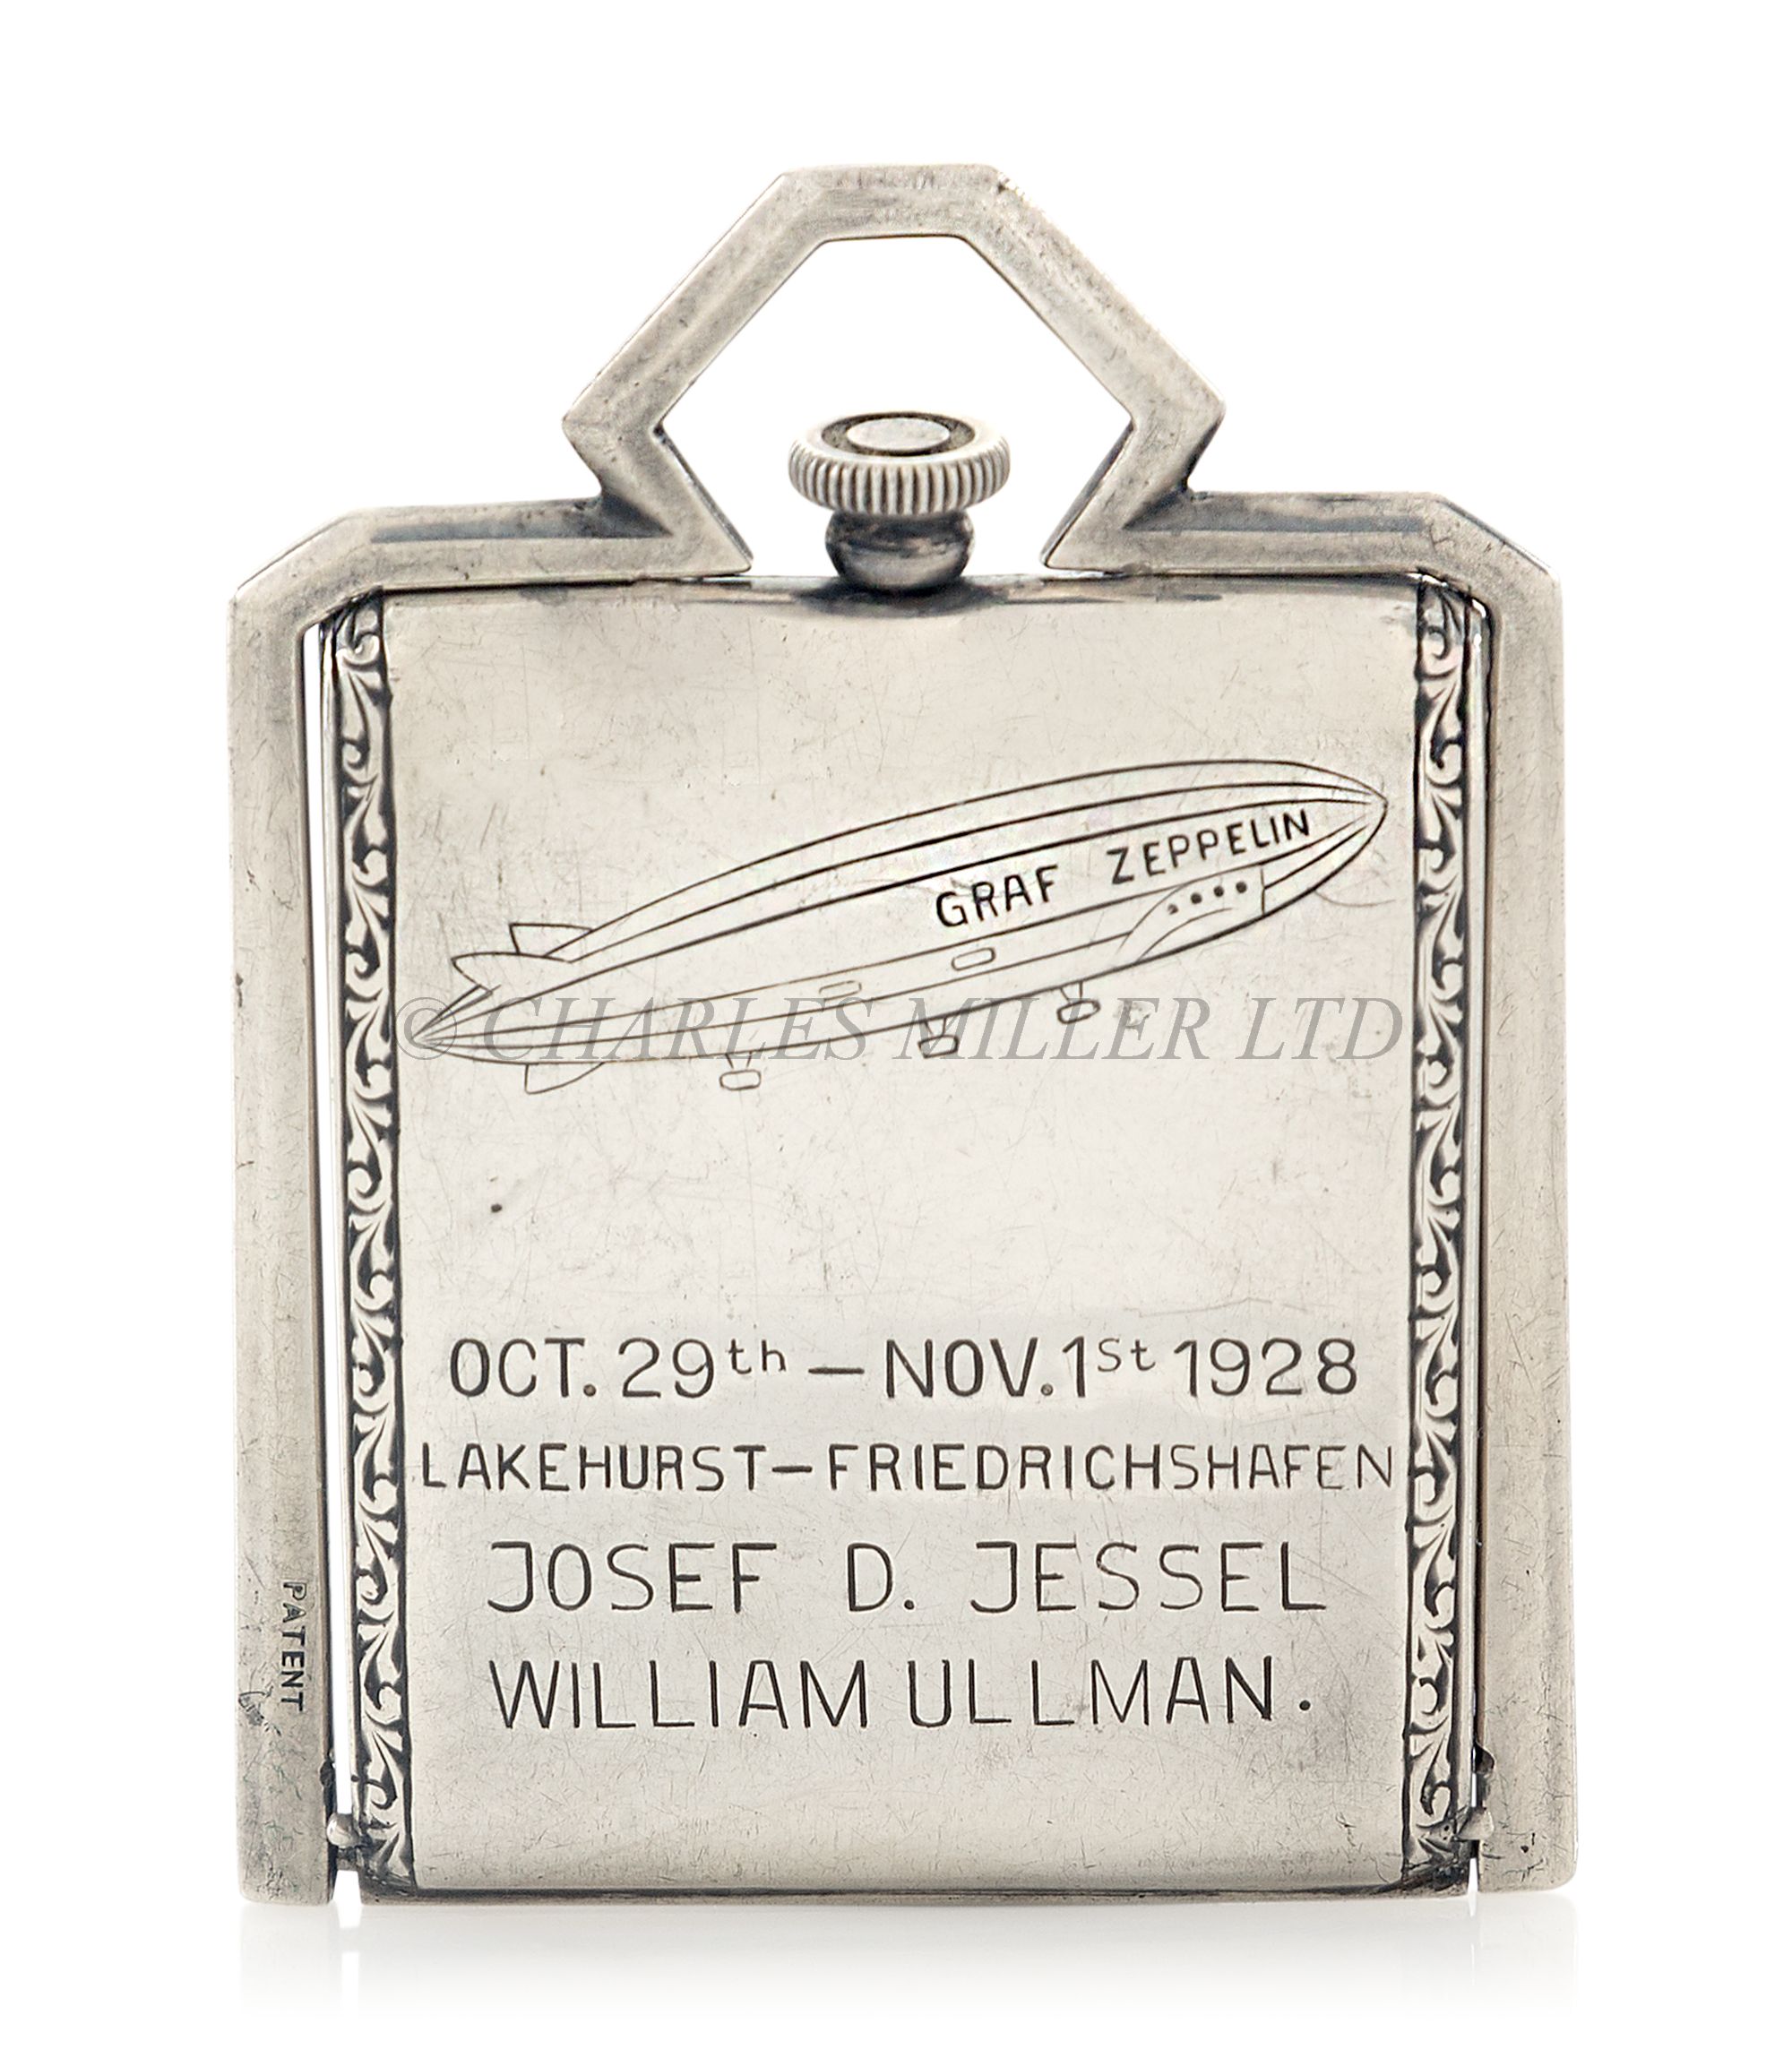 A SILVER FOB WATCH COMMEMORATING THE VOYAGE OF THE AIRSHIP GRAF ZEPPELIN BETWEEN LAKEHURST AND - Image 2 of 2